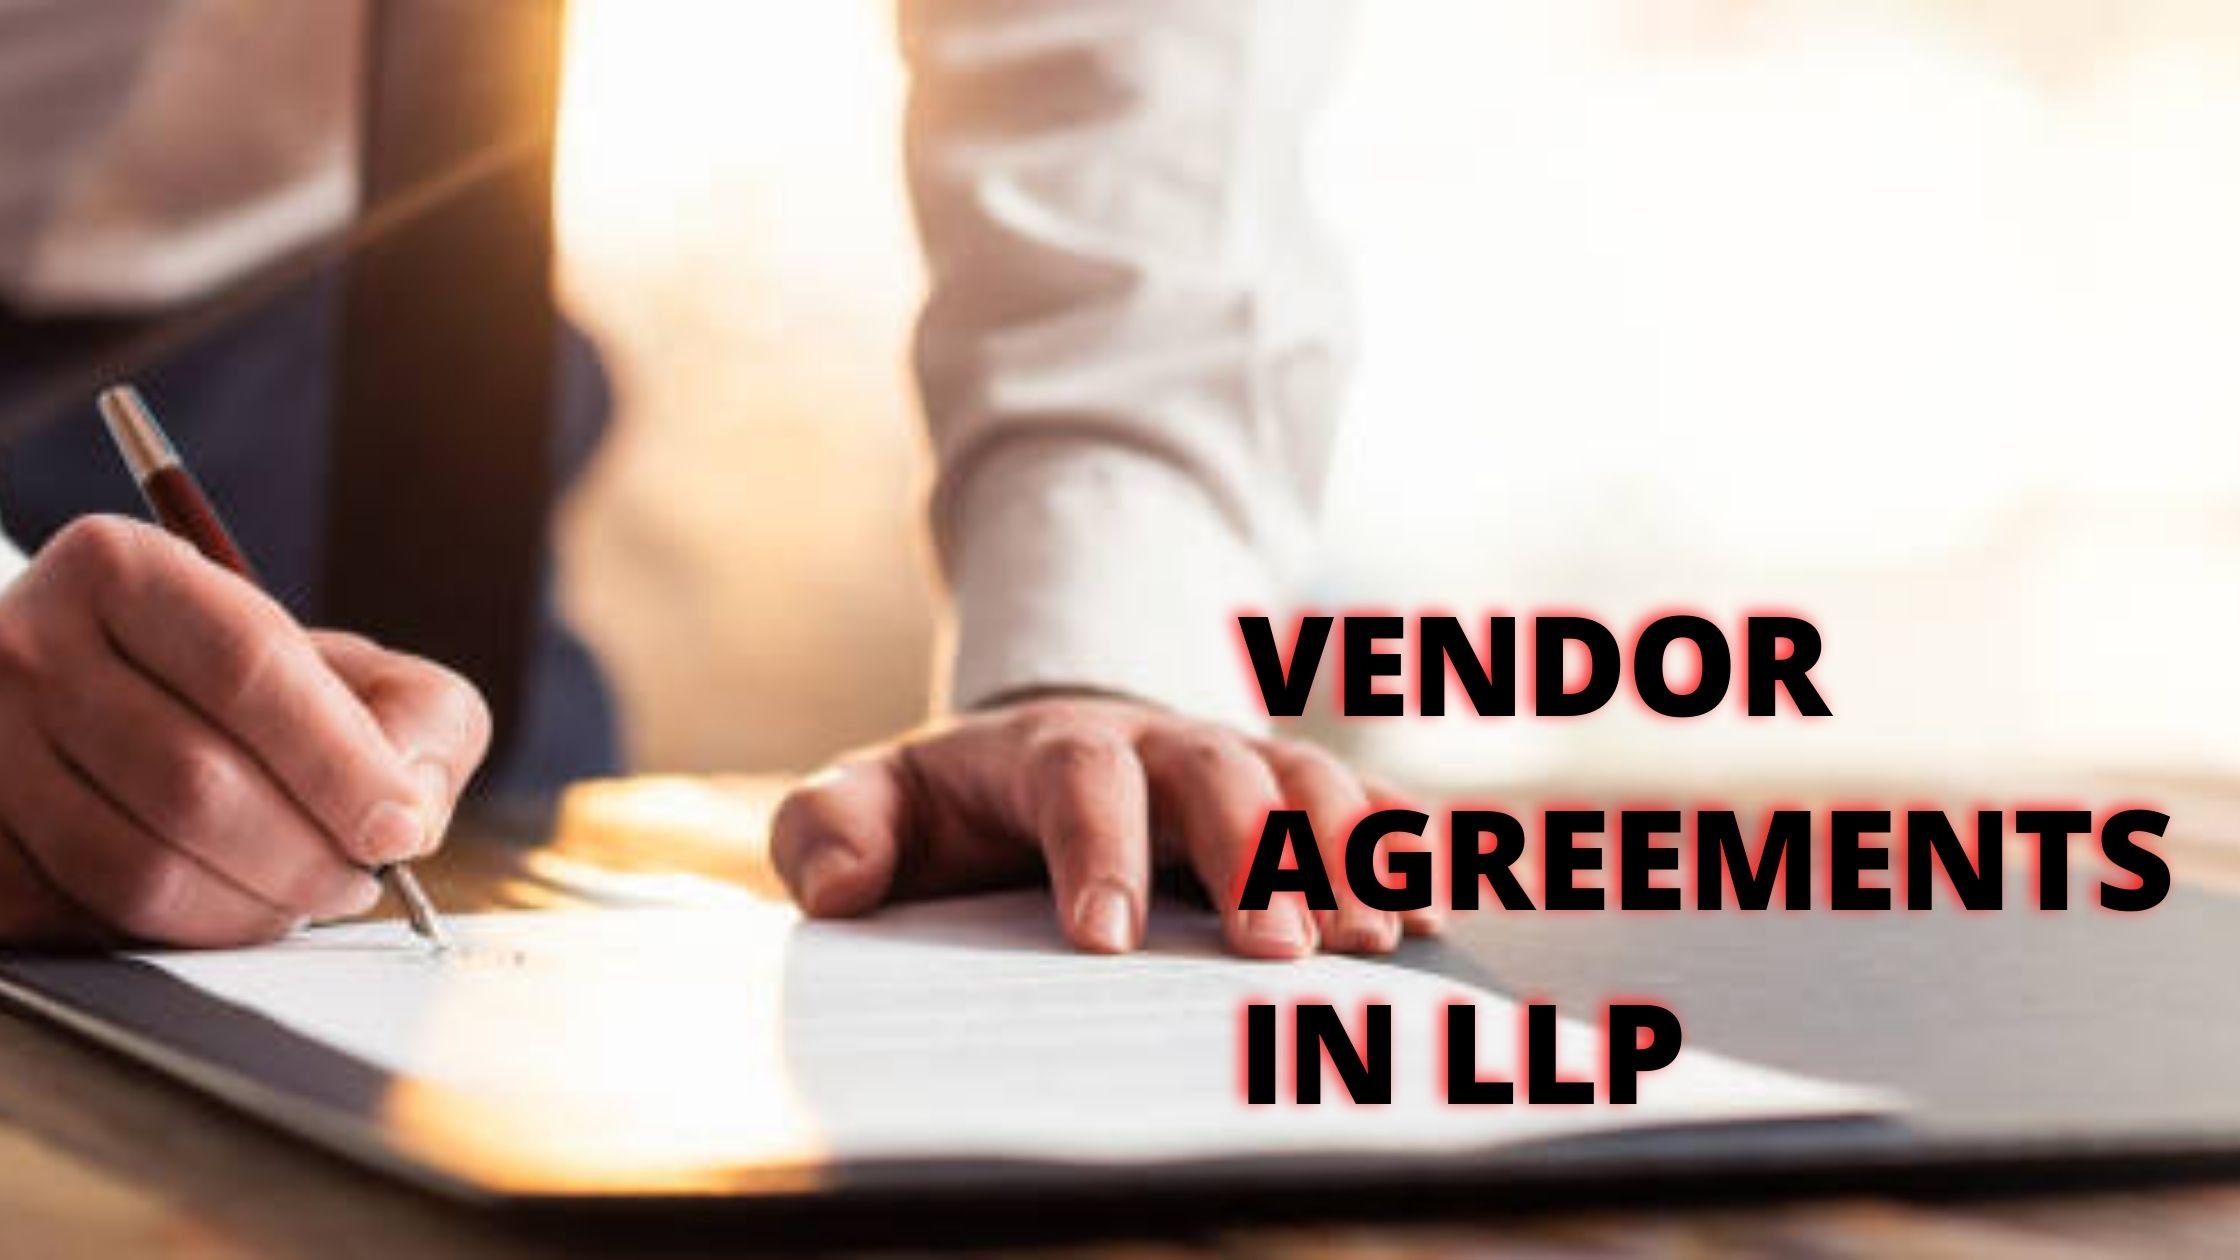 KEY ELEMENTS AND SIGNIFICANCE OF VENDOR AGREEMENT IN LLP